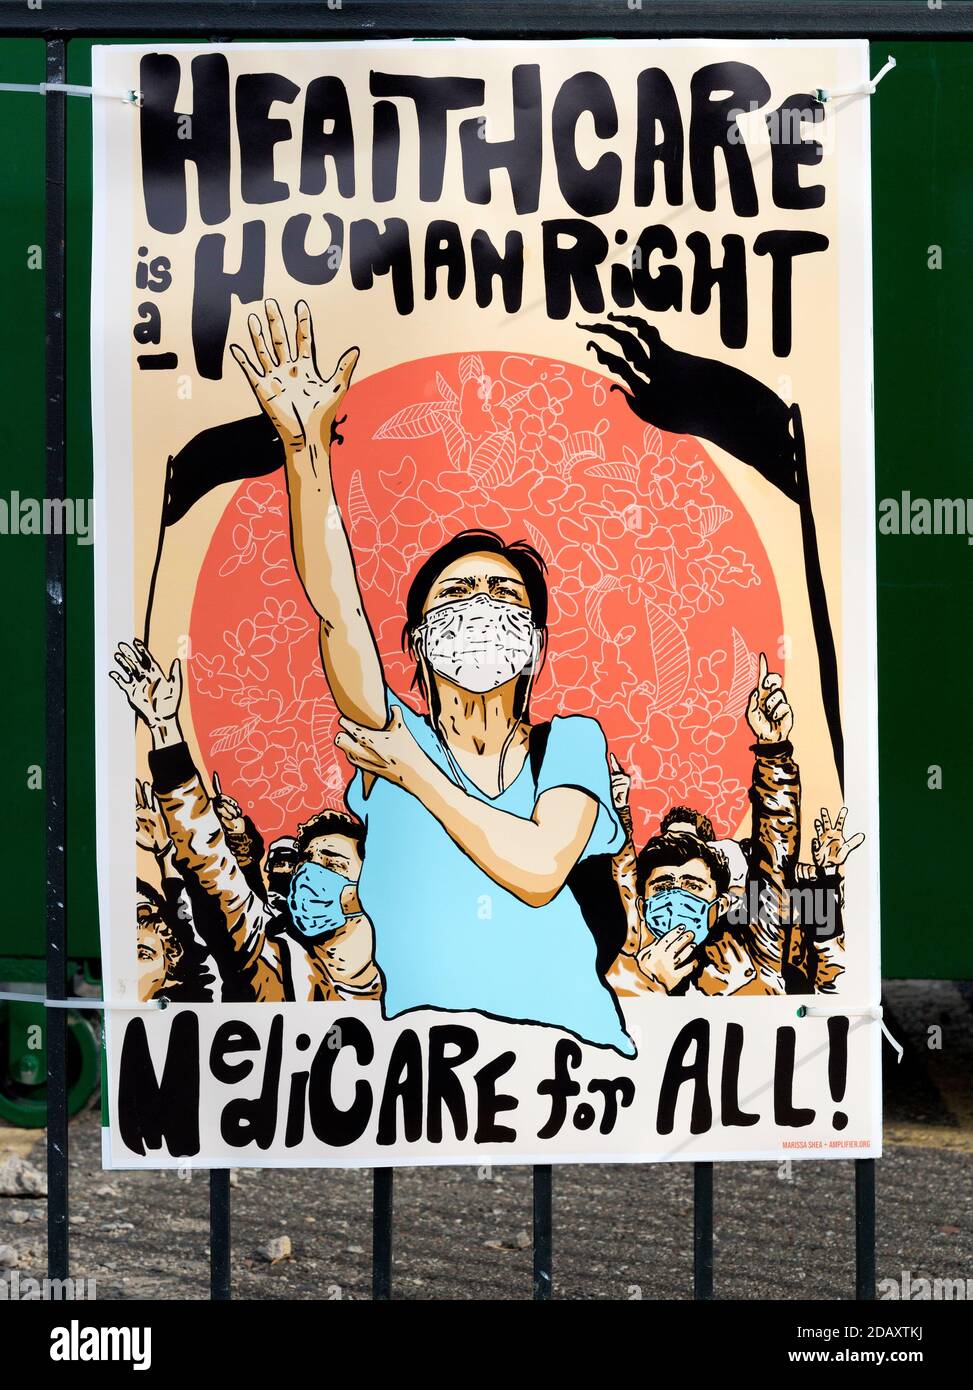 An illustrated poster showing people wearing face masks - Healthcare is a Human Right and Medicare for All slogans Stock Photo